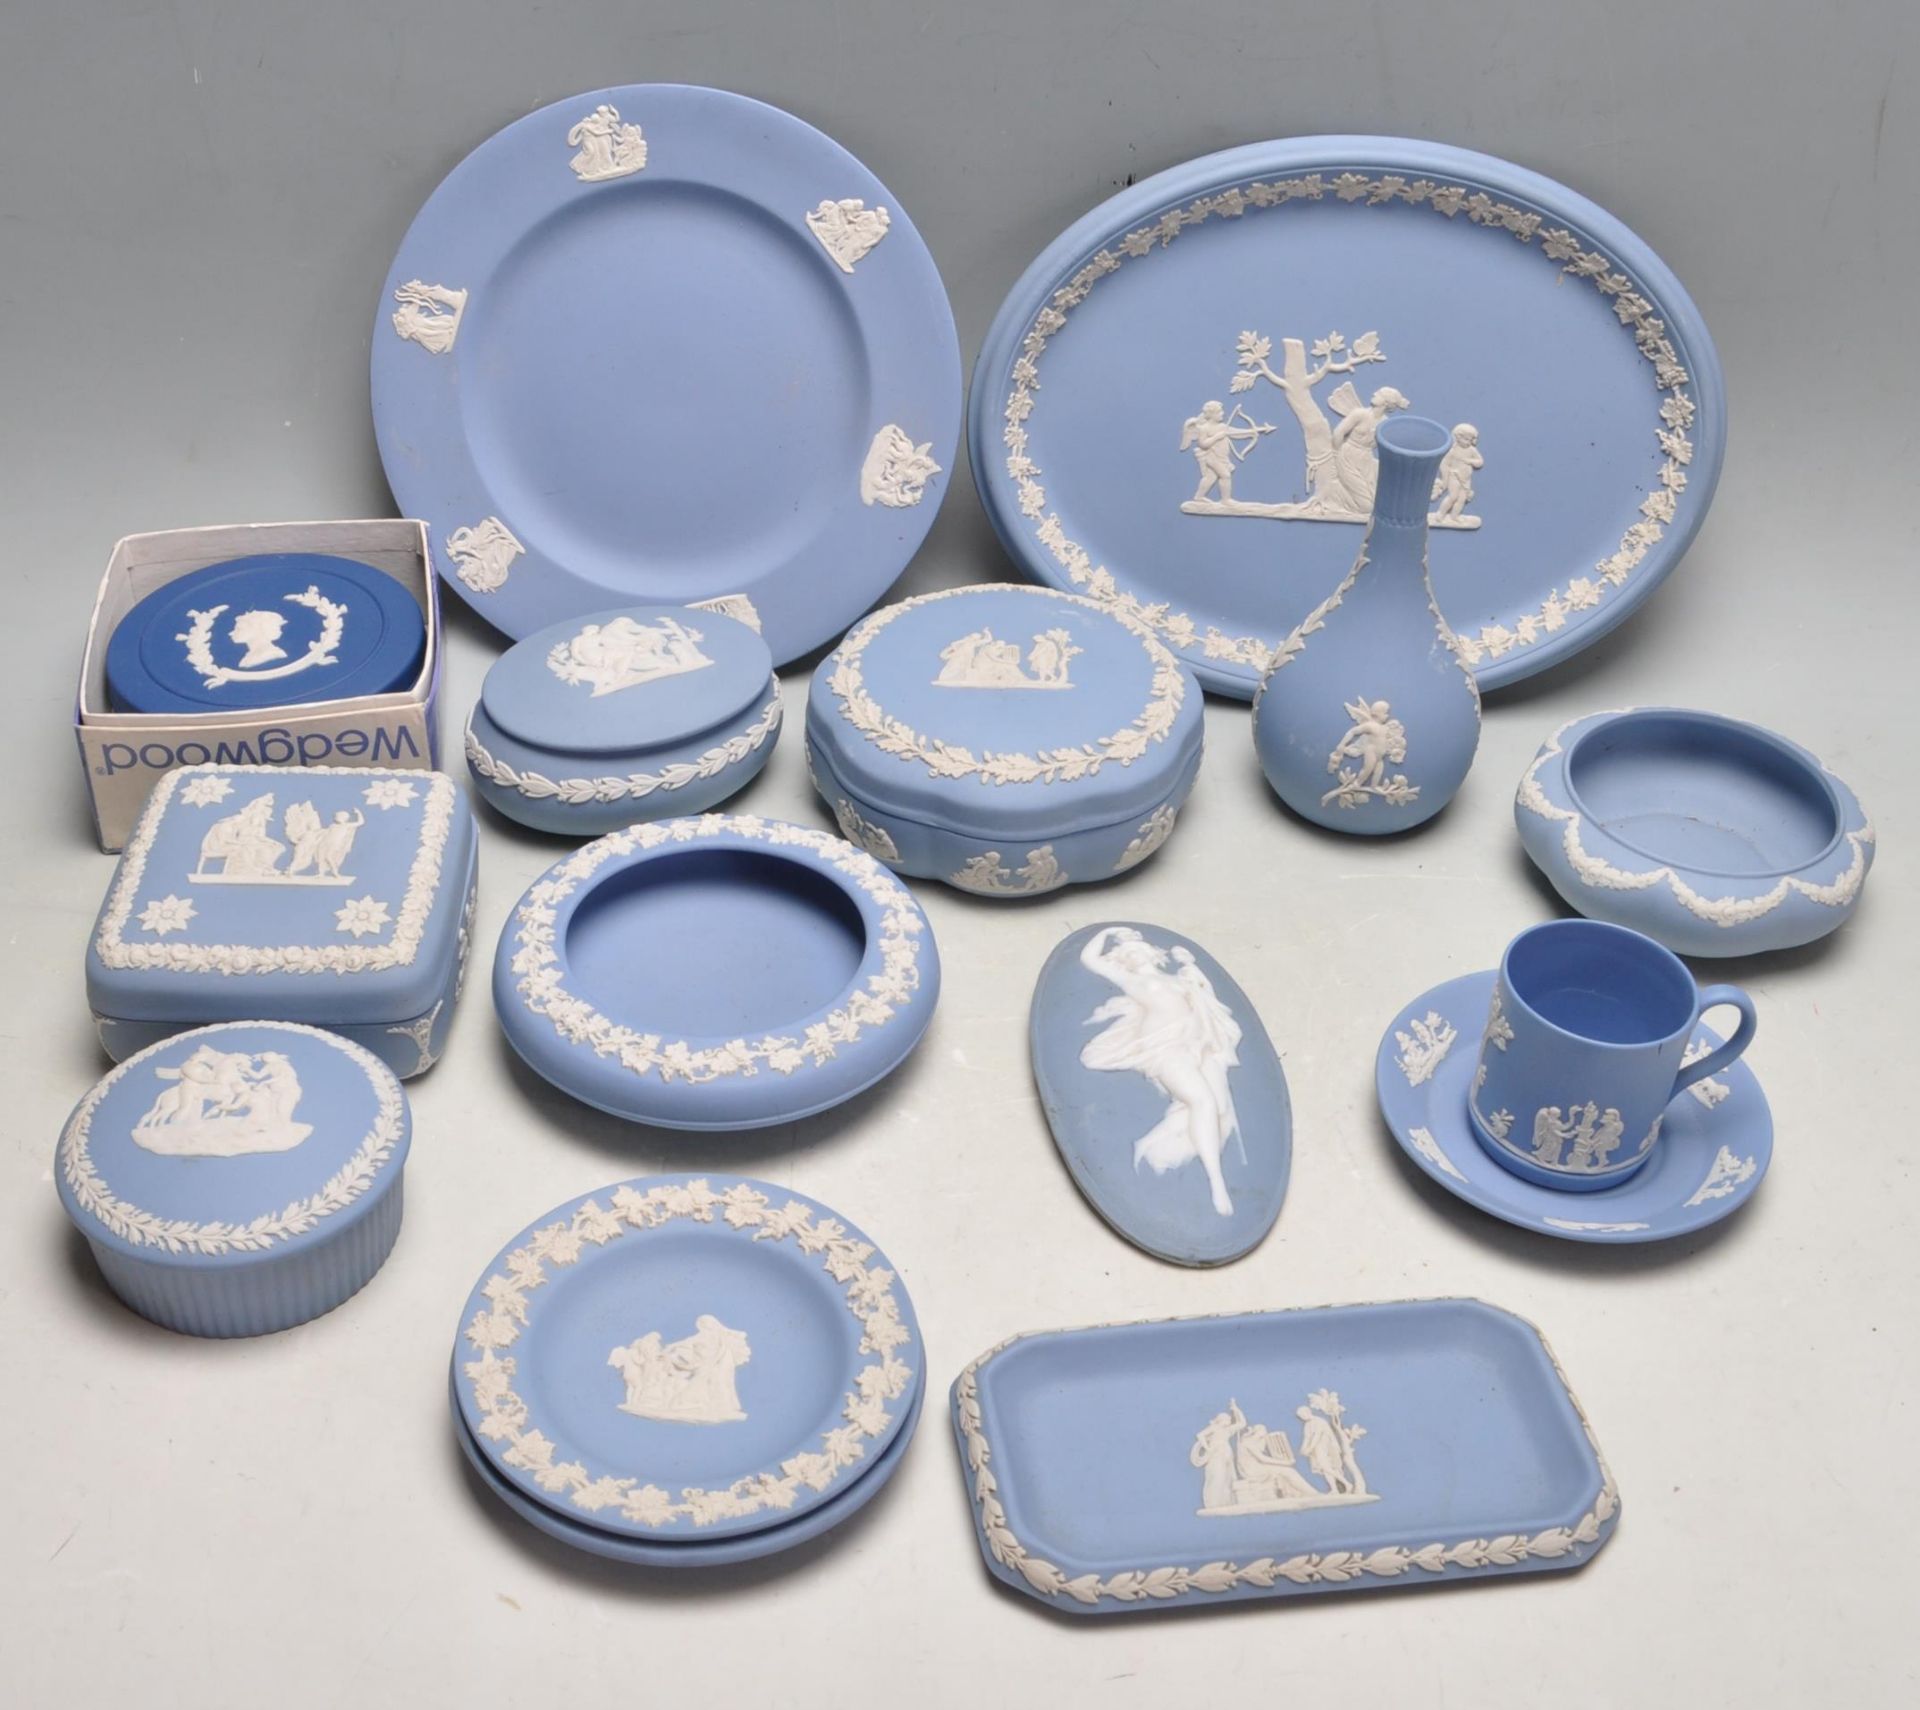 COLLECTION OF WEDGWOOD JASPERWARE POTTERY TRINKET BOXES AND PLATES